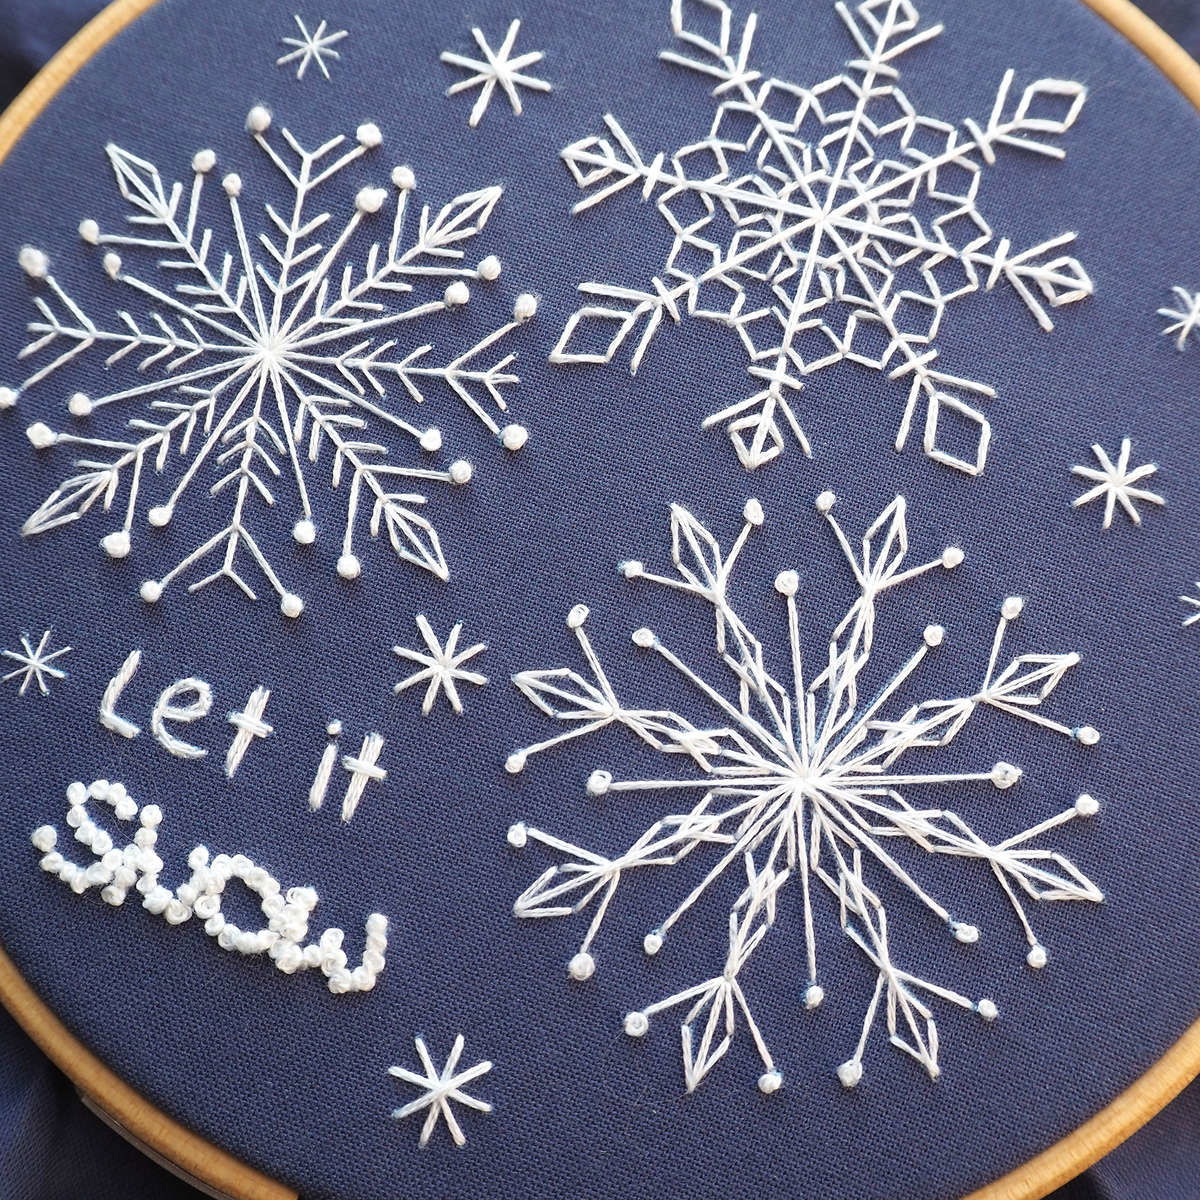 Embroidery snowflake pattern with different sized snowflakes